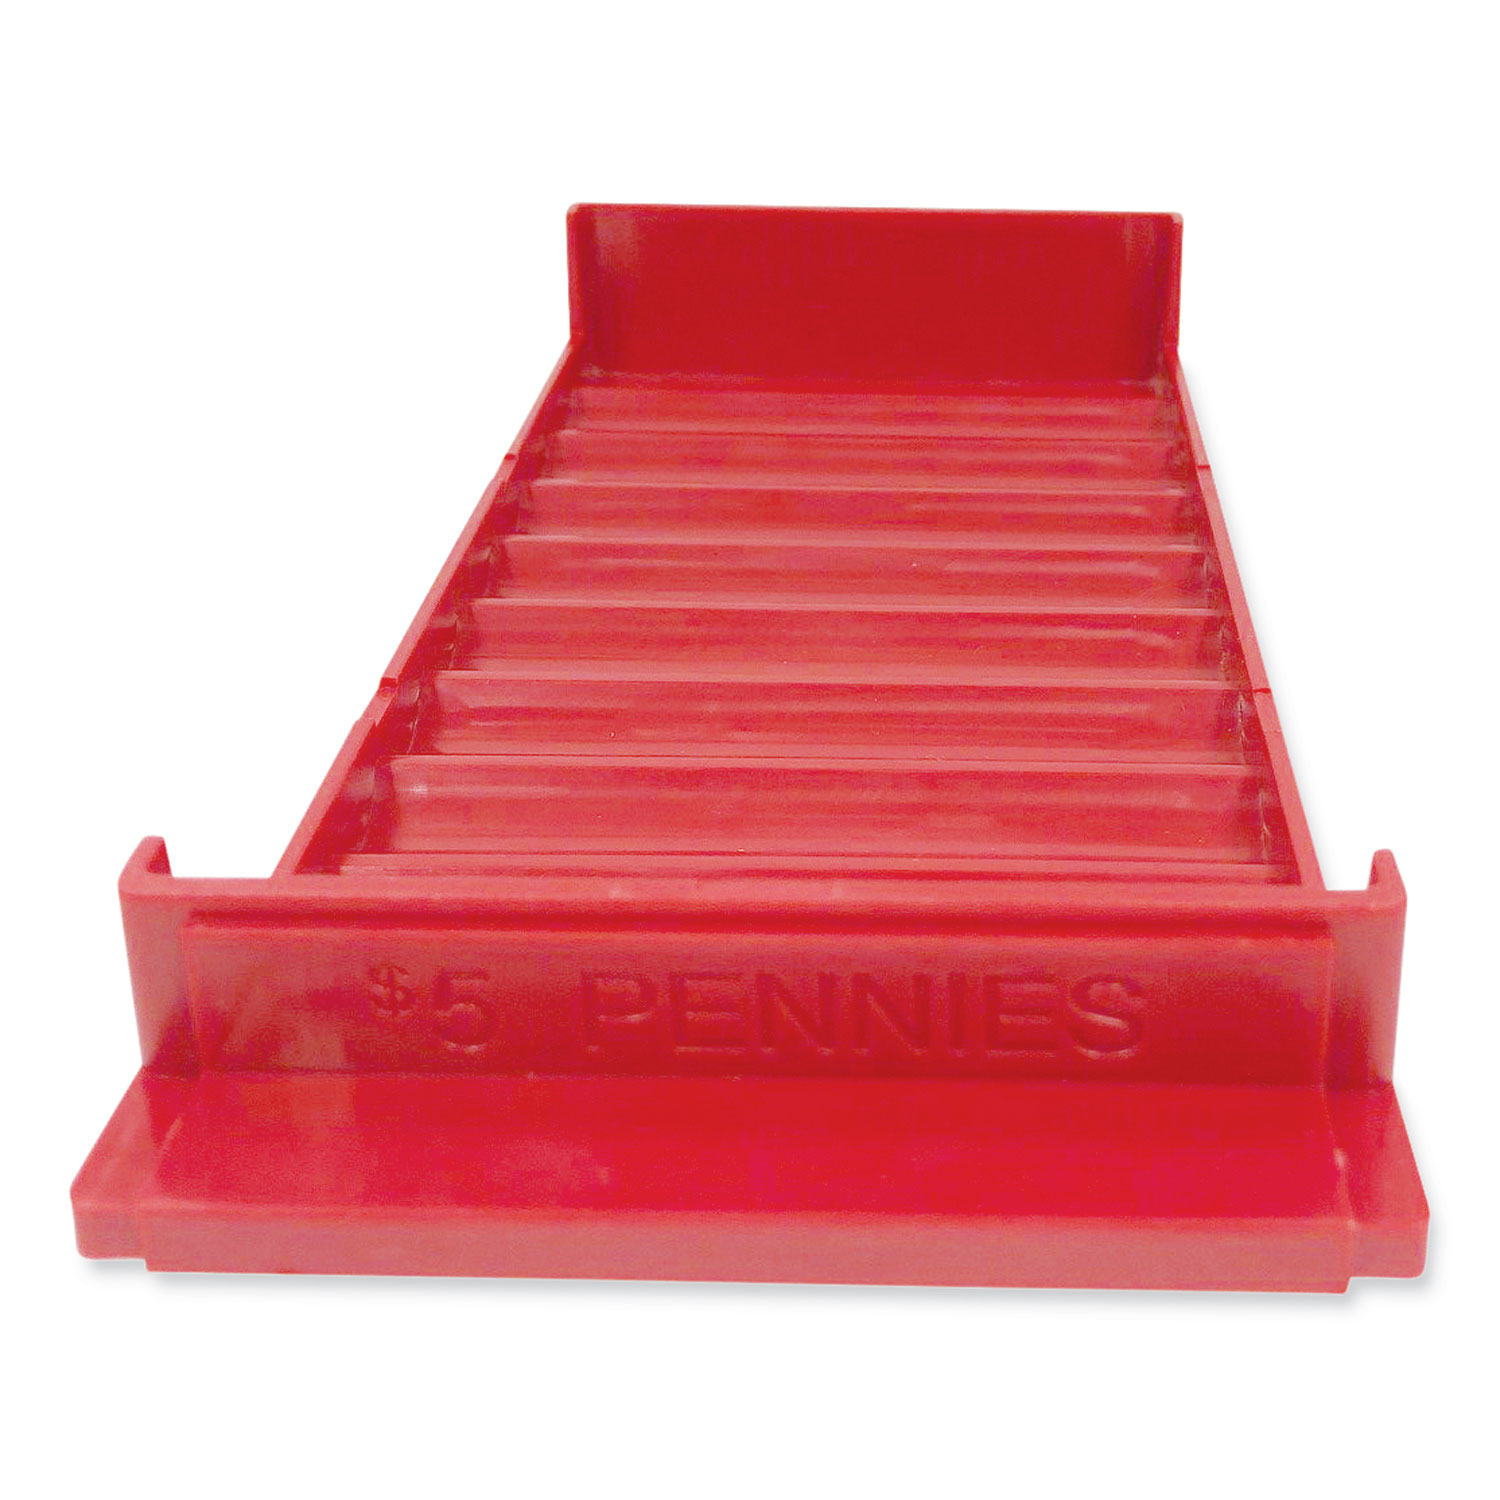 CONTROLTEK® Stackable Plastic Coin Tray, Pennies, 3.75 x 11.5 x 1.5, Red, 2/Pack